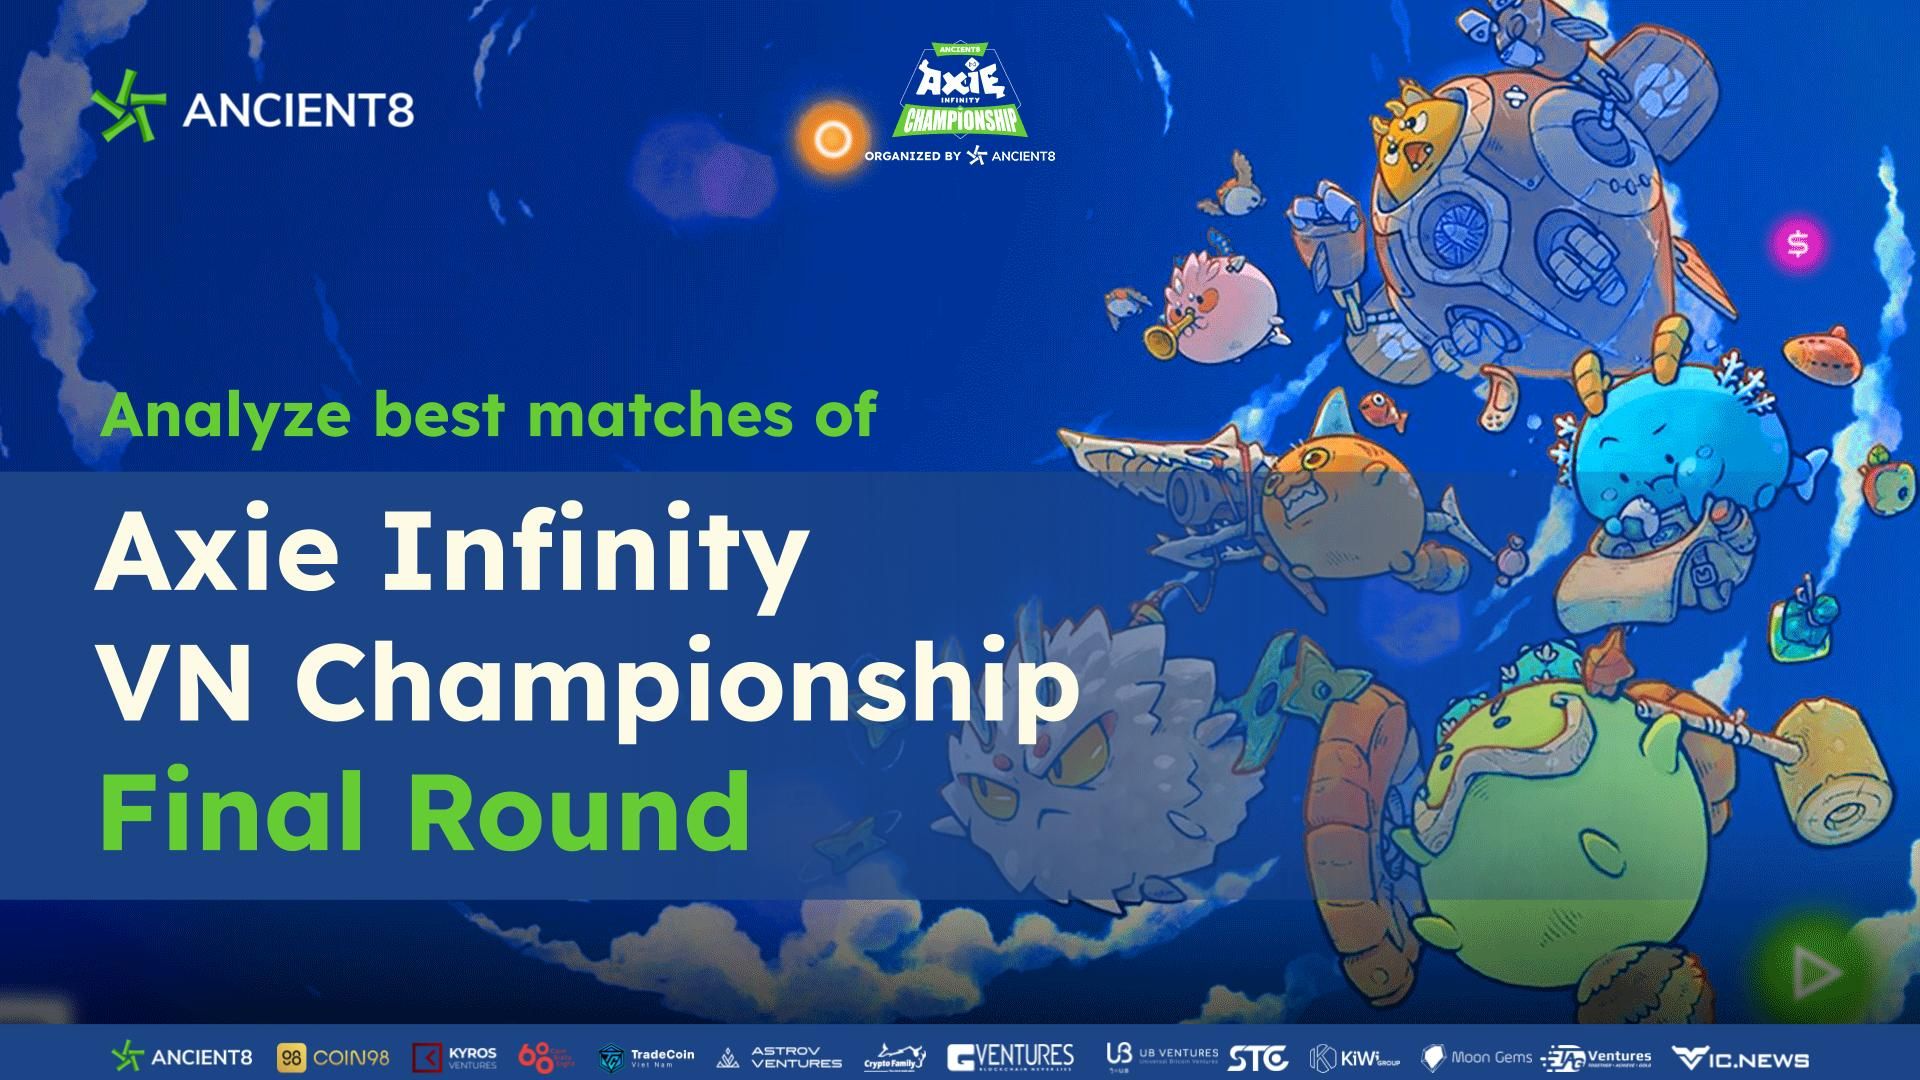 Analyze best matches of Axie Infinity VN Championship - Final